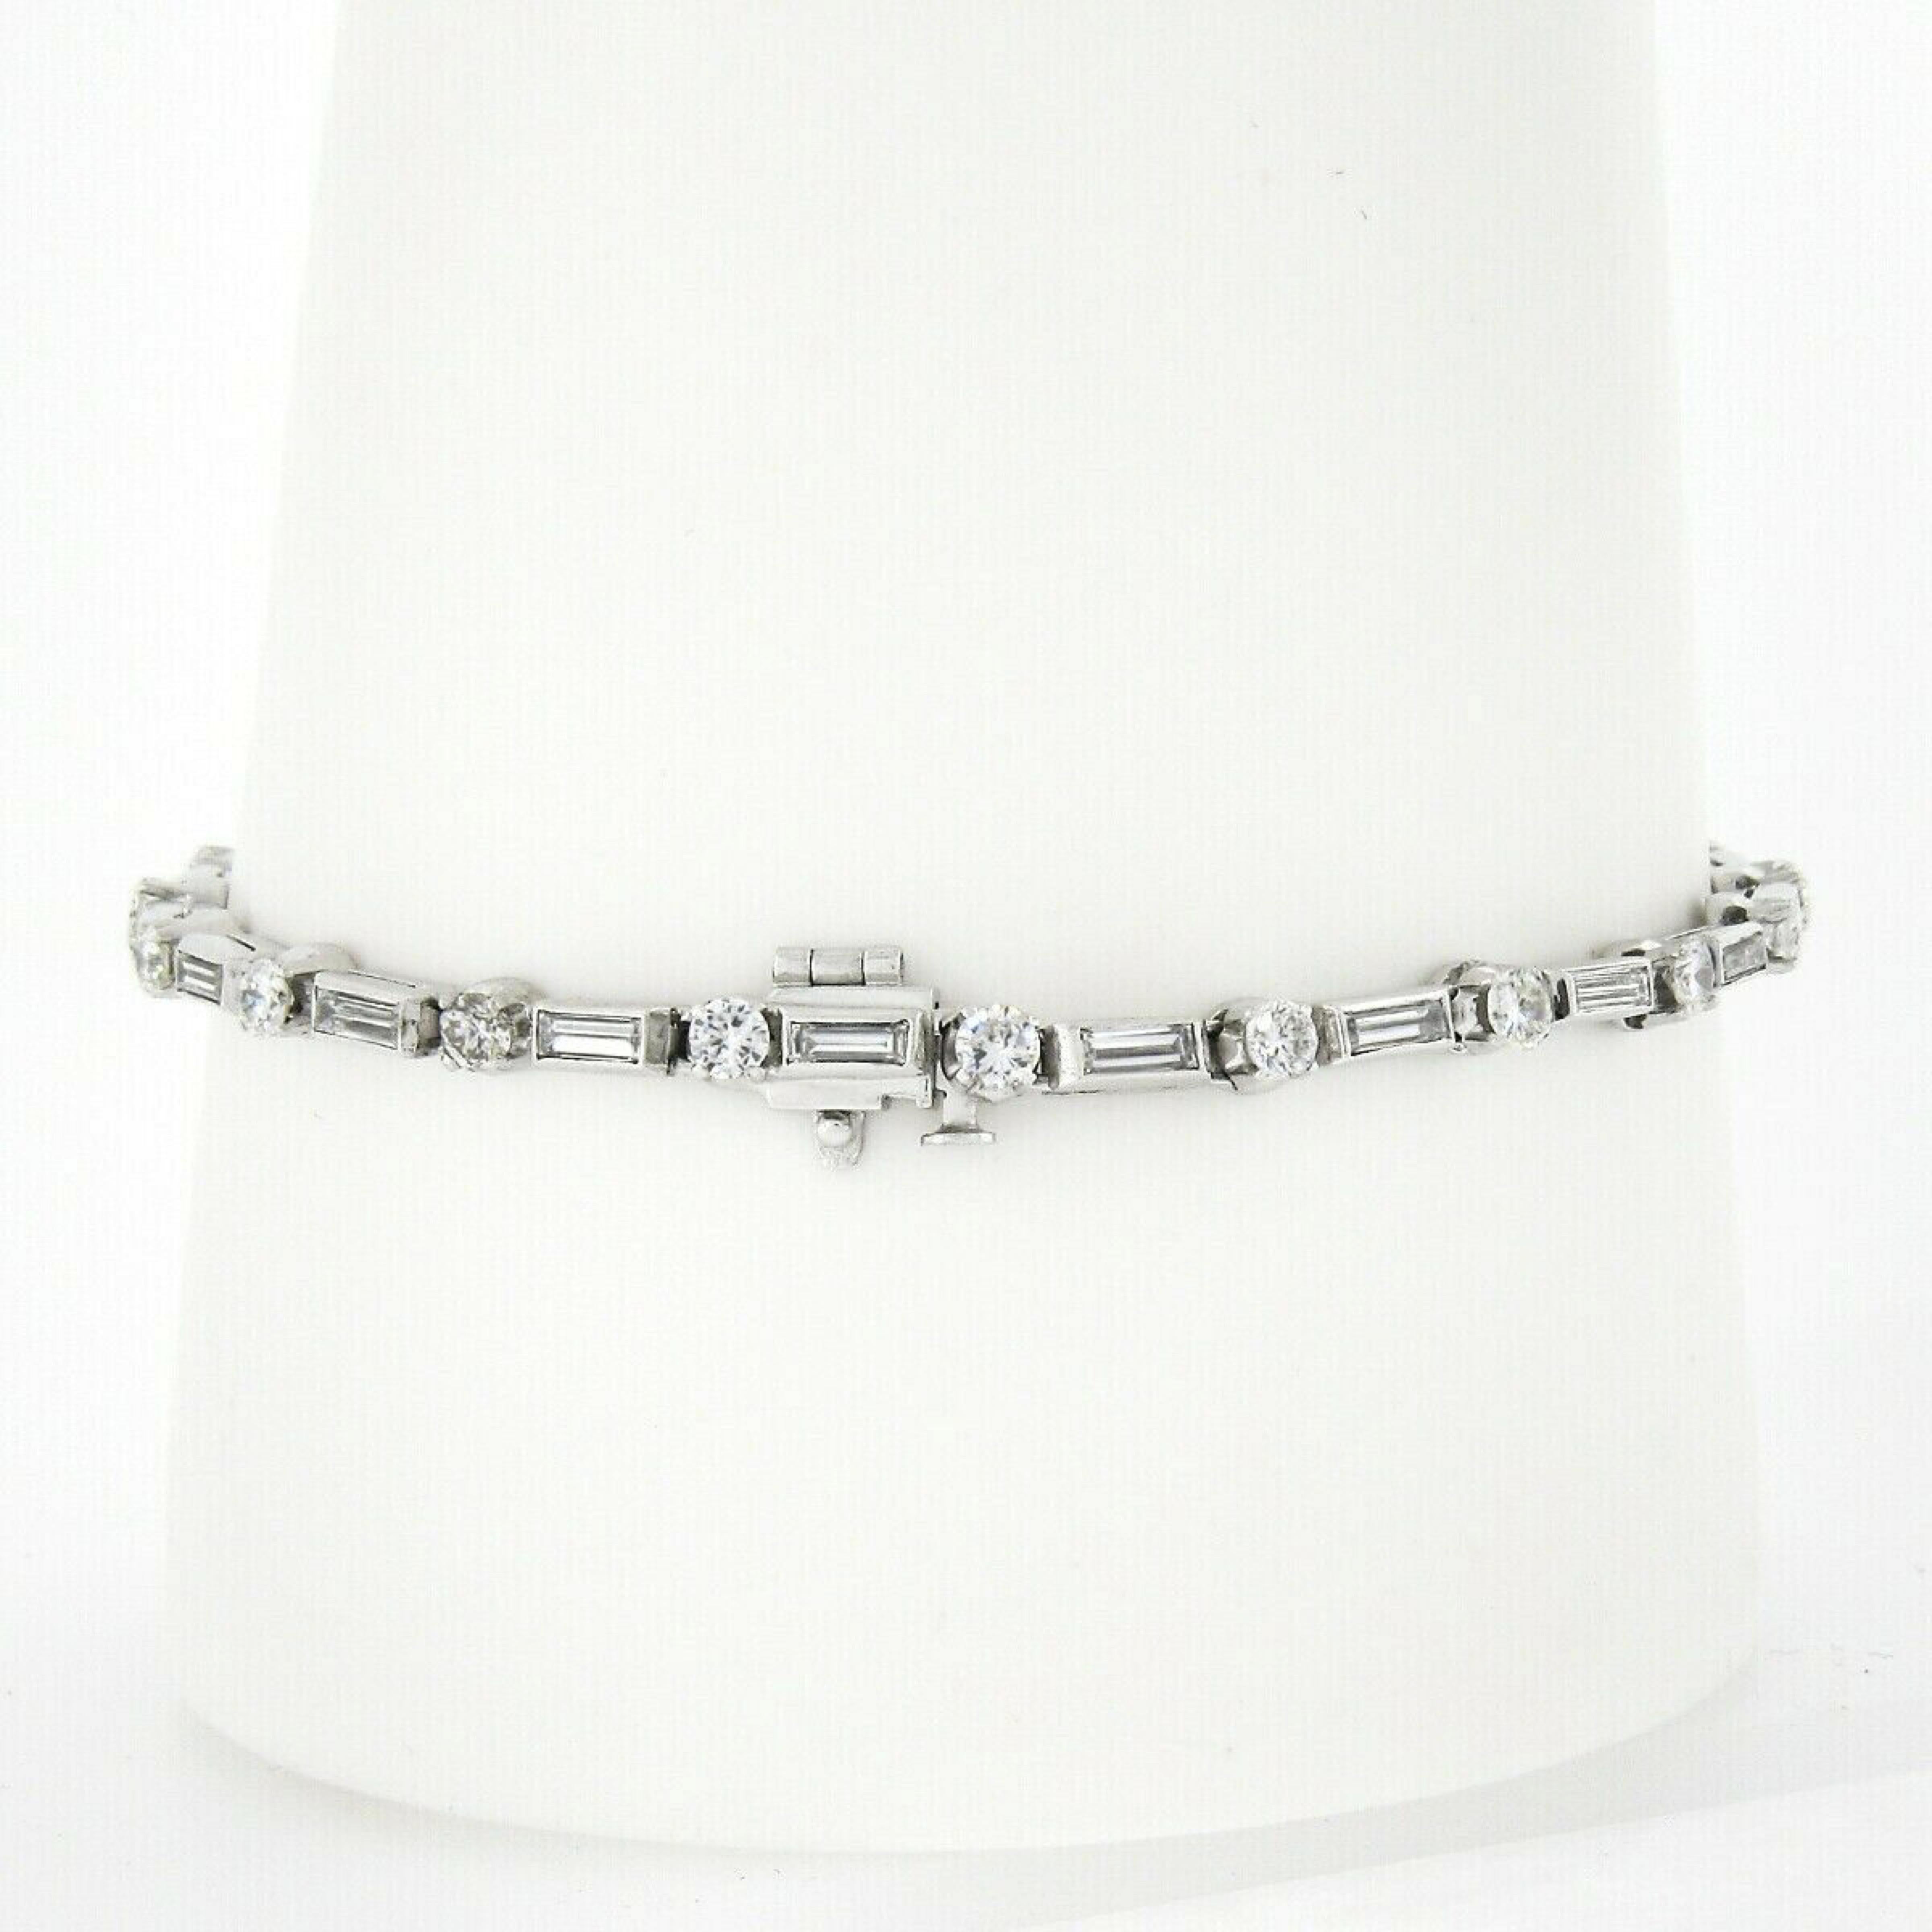 This breathtaking vintage diamond tennis bracelet is crafted in solid platinum and features approximately 3.80 carats of super fine quality diamonds throughout. It features an elegant design that alternates with a prong set round brilliant cut